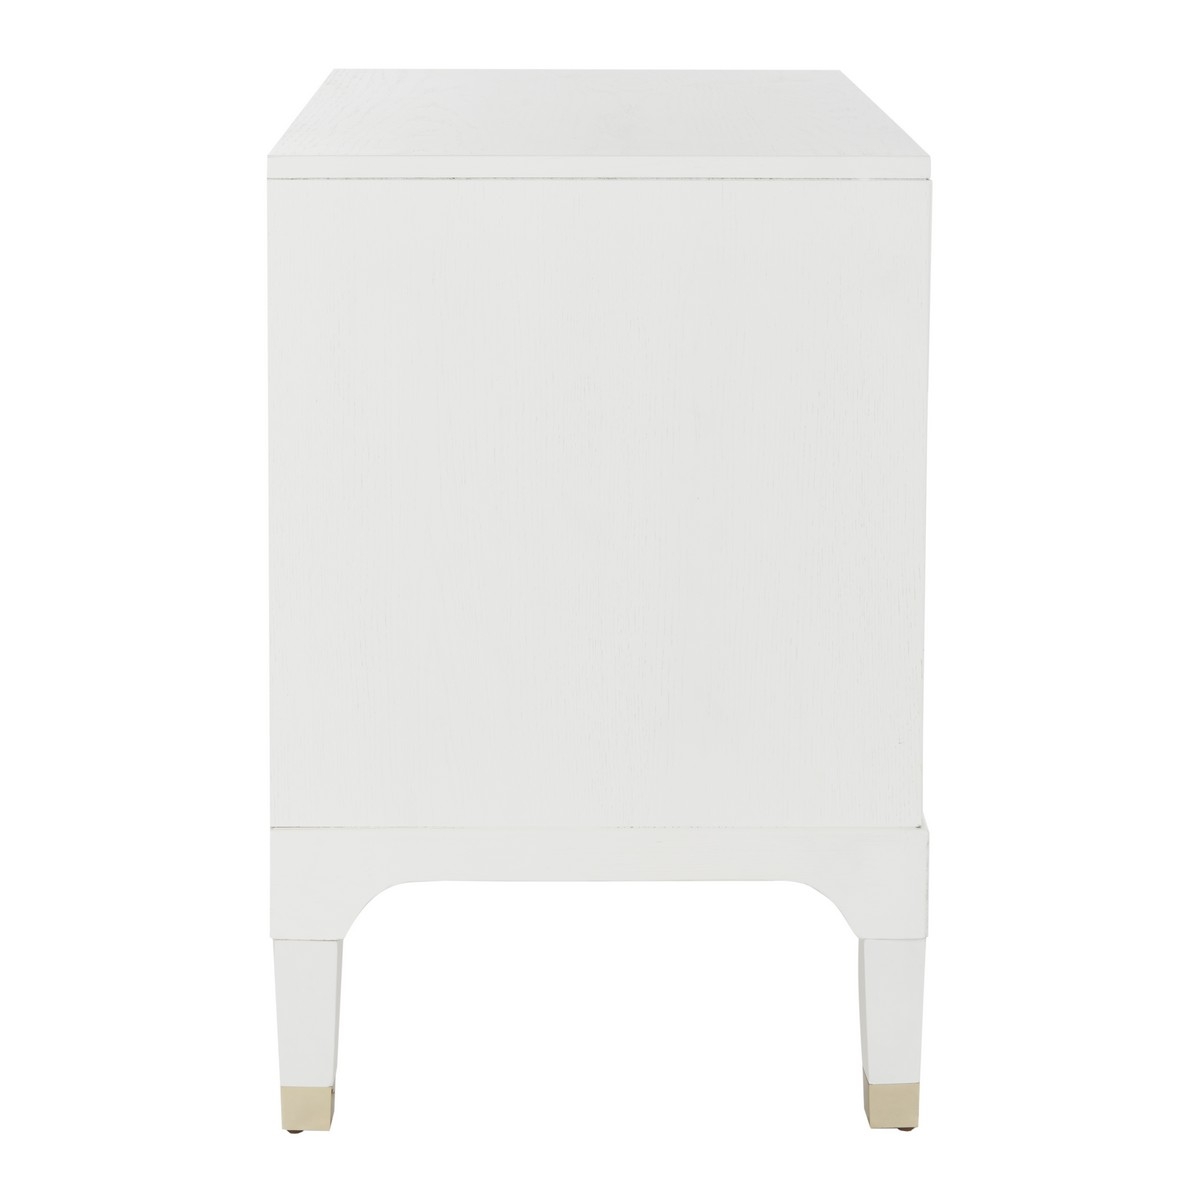 Lorna 3-Drawer Contemporary Night Stand, White - Image 3